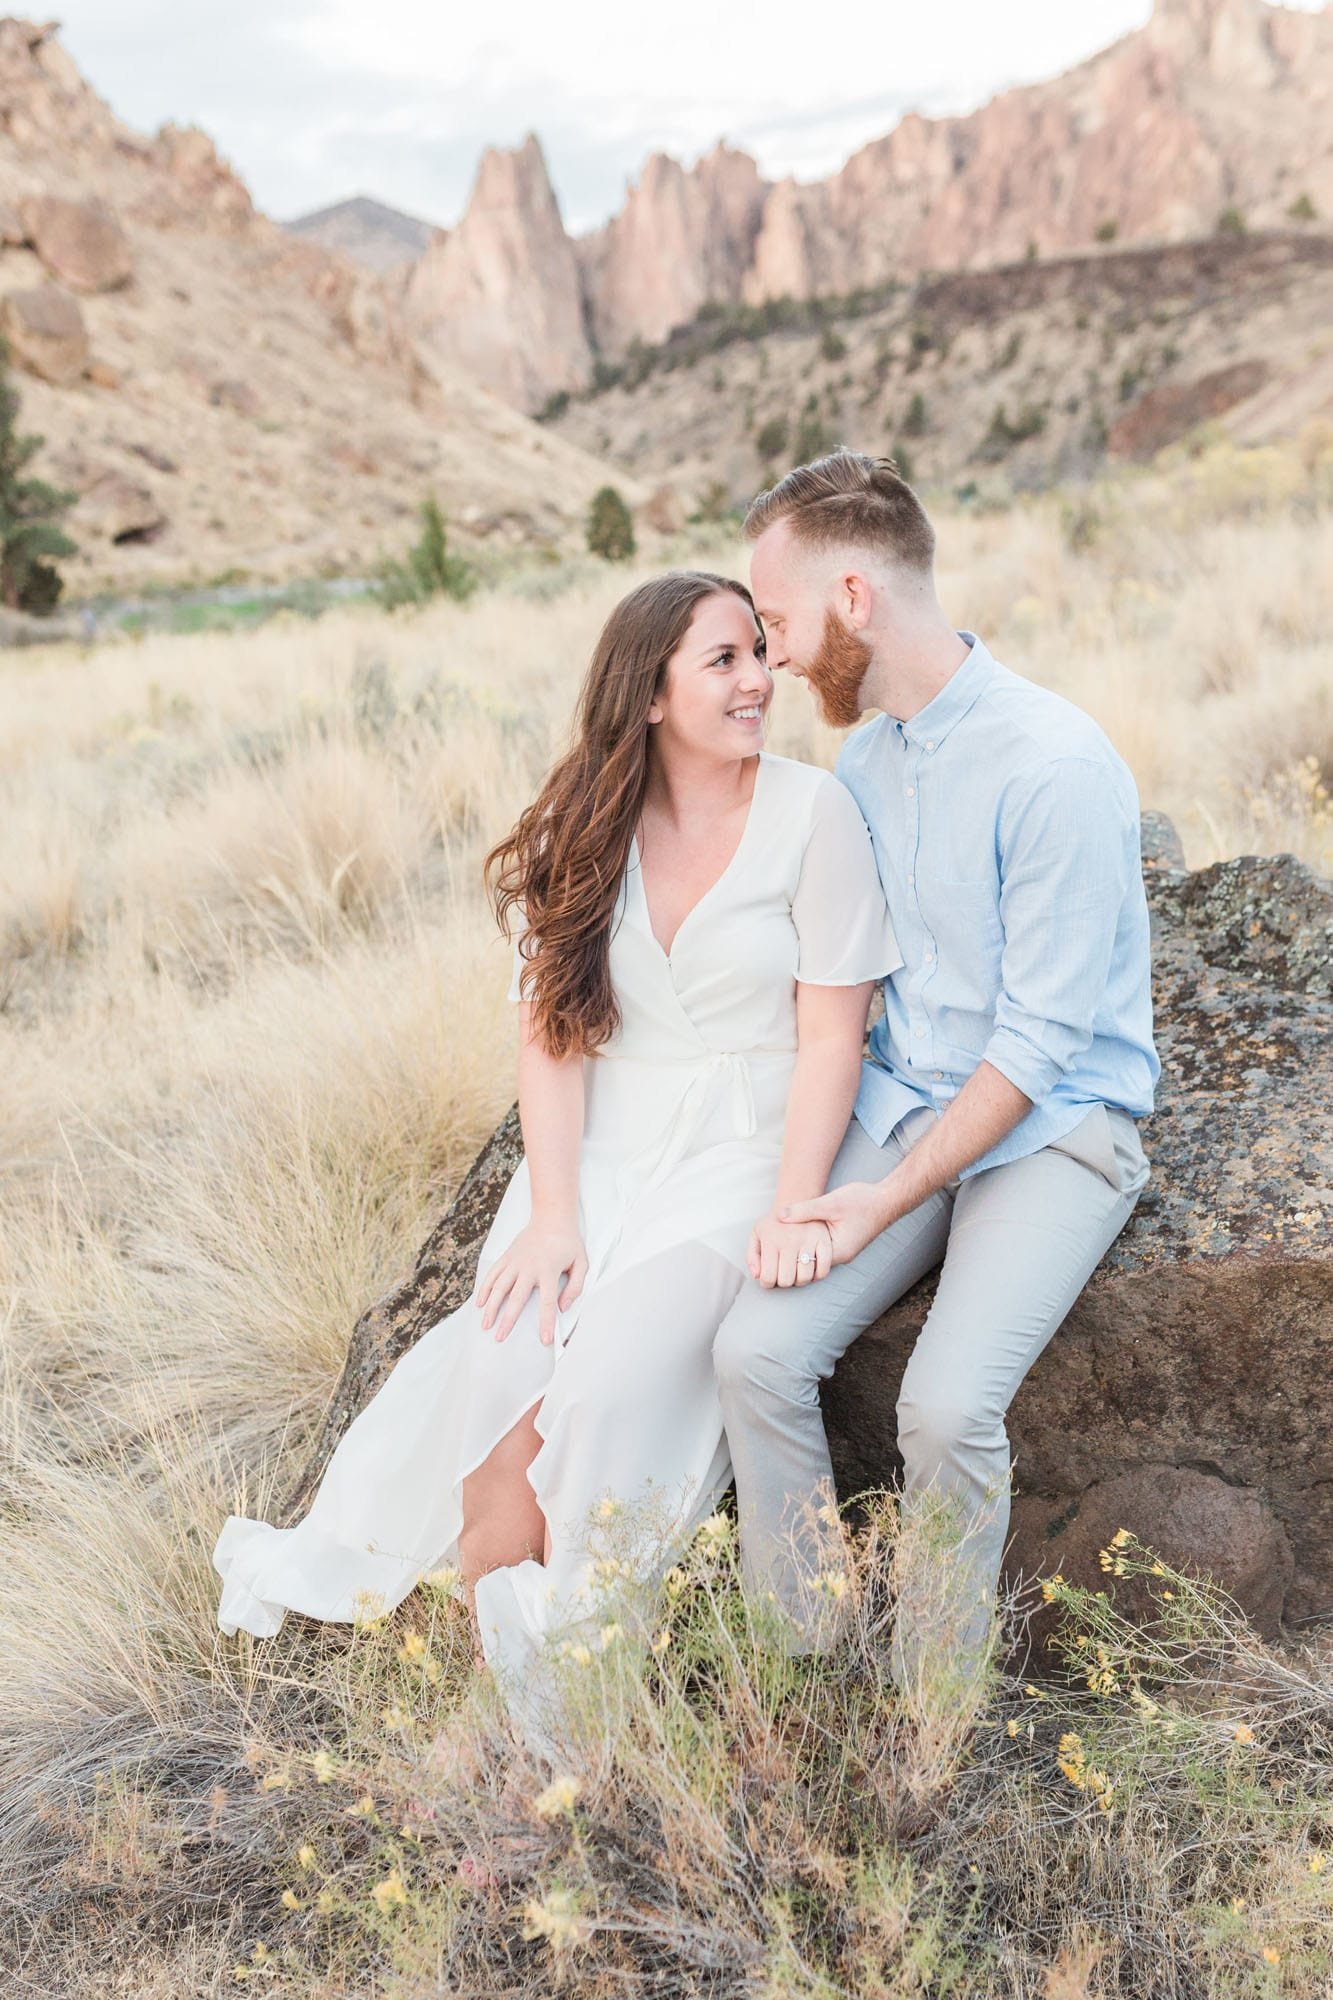 Engagement photos at Smith Rock outside of Bend, Oregon